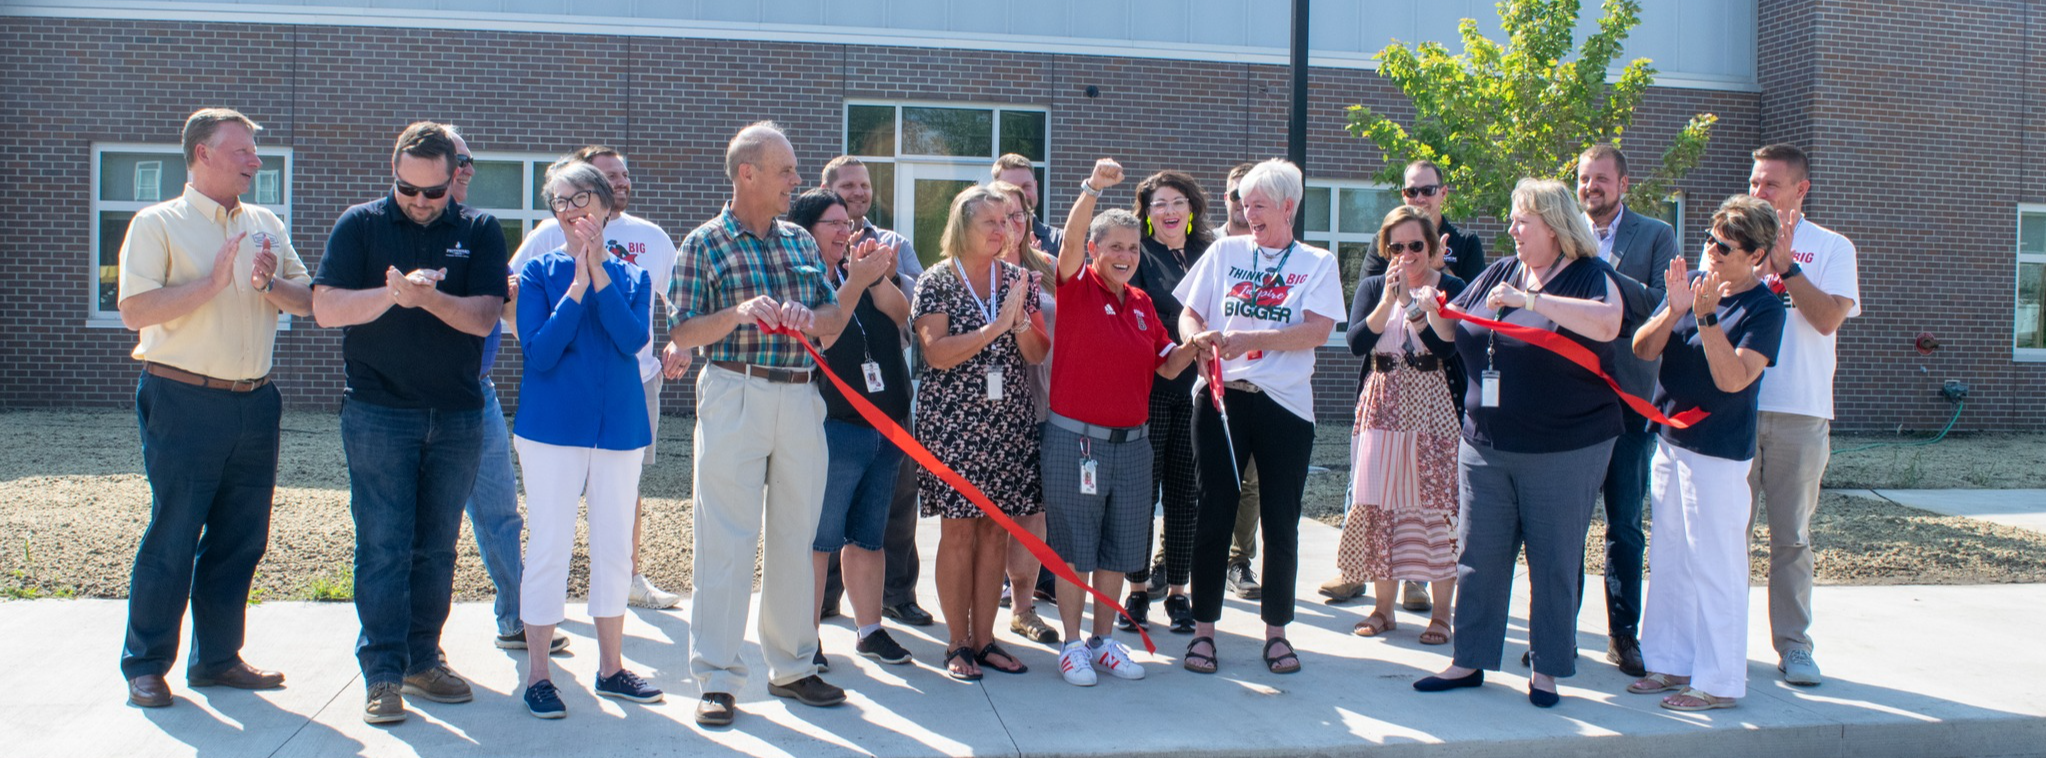 Futures Alternative High School ribbon cutting ceremony - a crowd standing in front of the building Director Kim Kitterman cutting the red ribbon